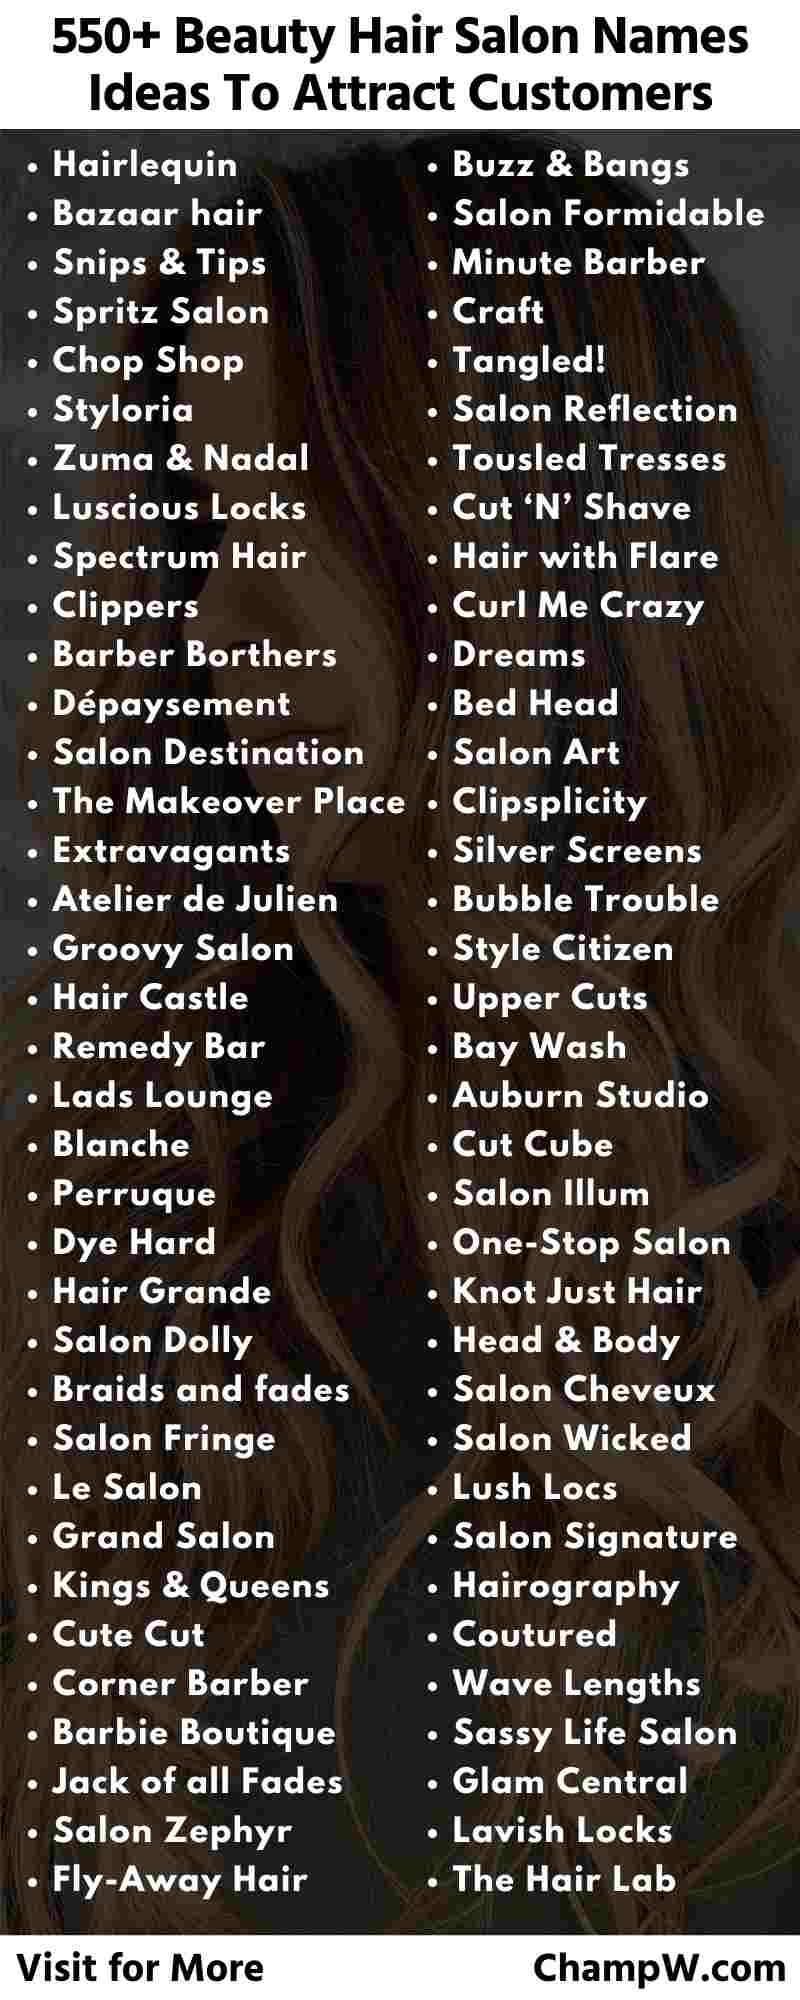 550+ Beauty Hair Salon Names ideas that Attracts Customers